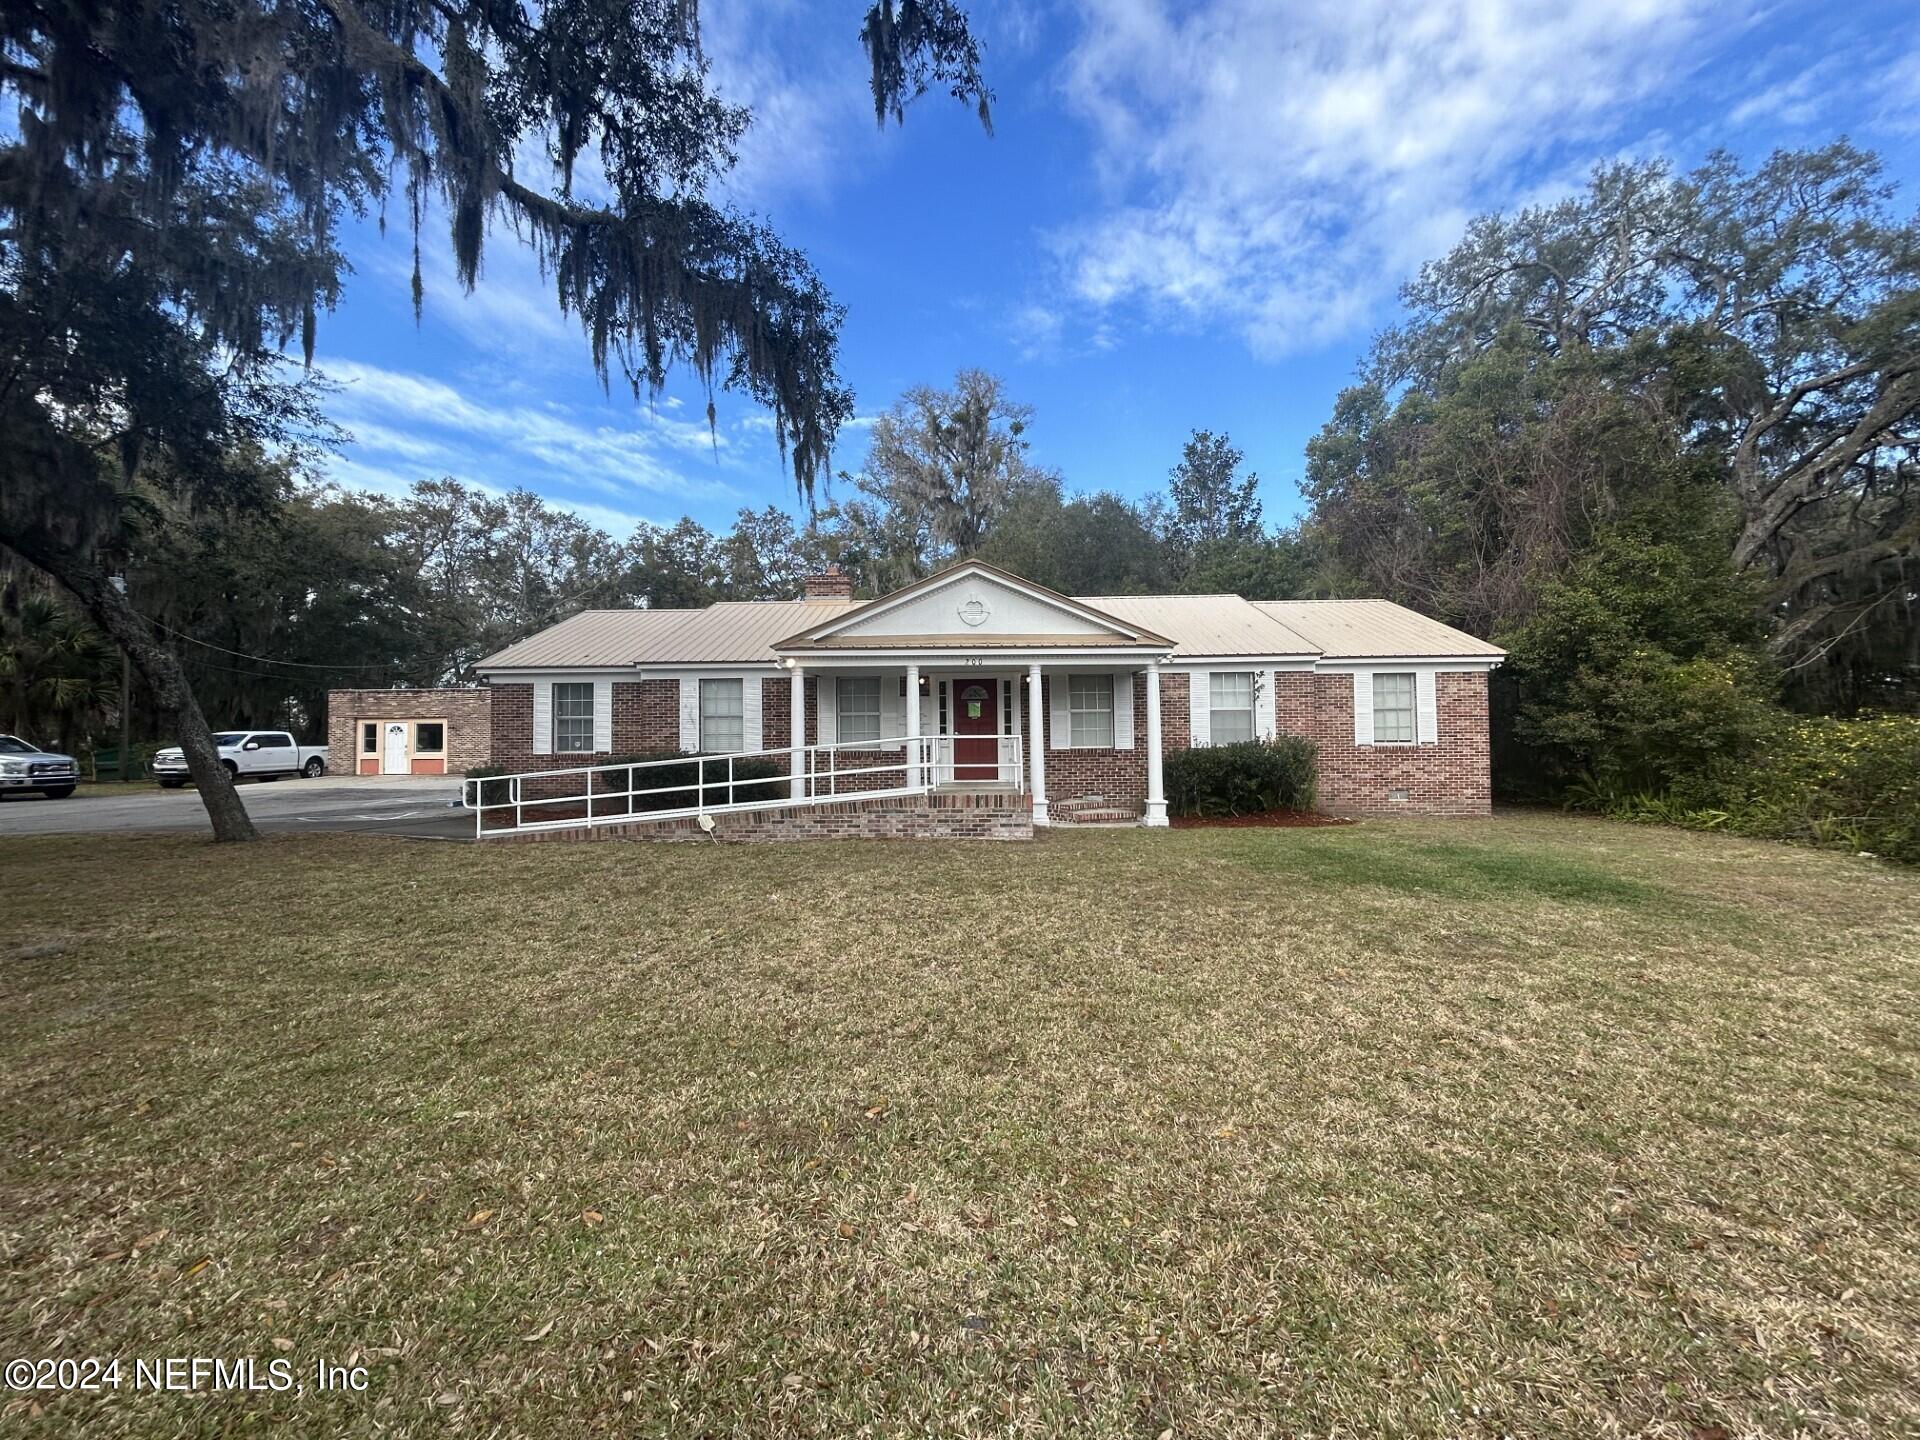 Palatka, FL home for sale located at 200 MISSION Road, Palatka, FL 32177